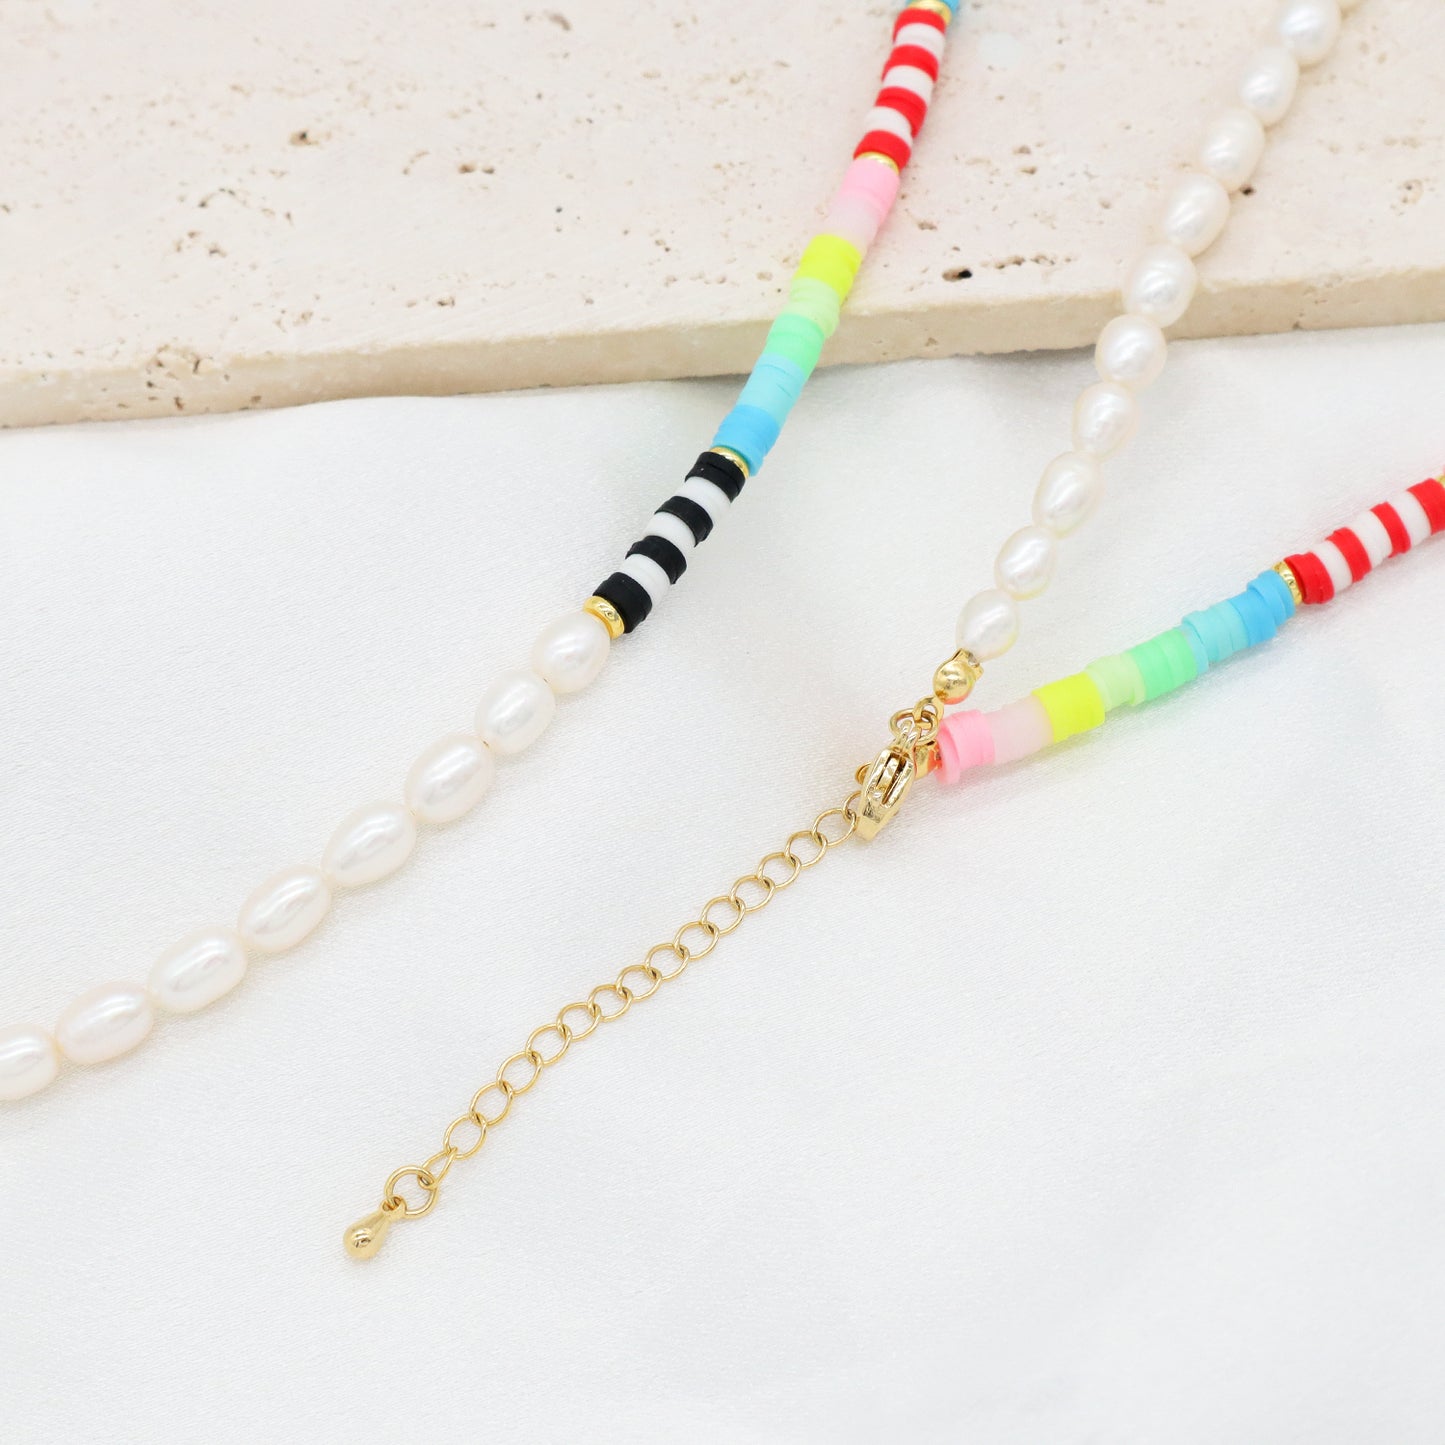 Custom OEM Factory Manufacture Fashion Natural Freshwater pearl Choker necklace Ajustable Handmade Colorful Polymer clay Necklace for Women Jewelry